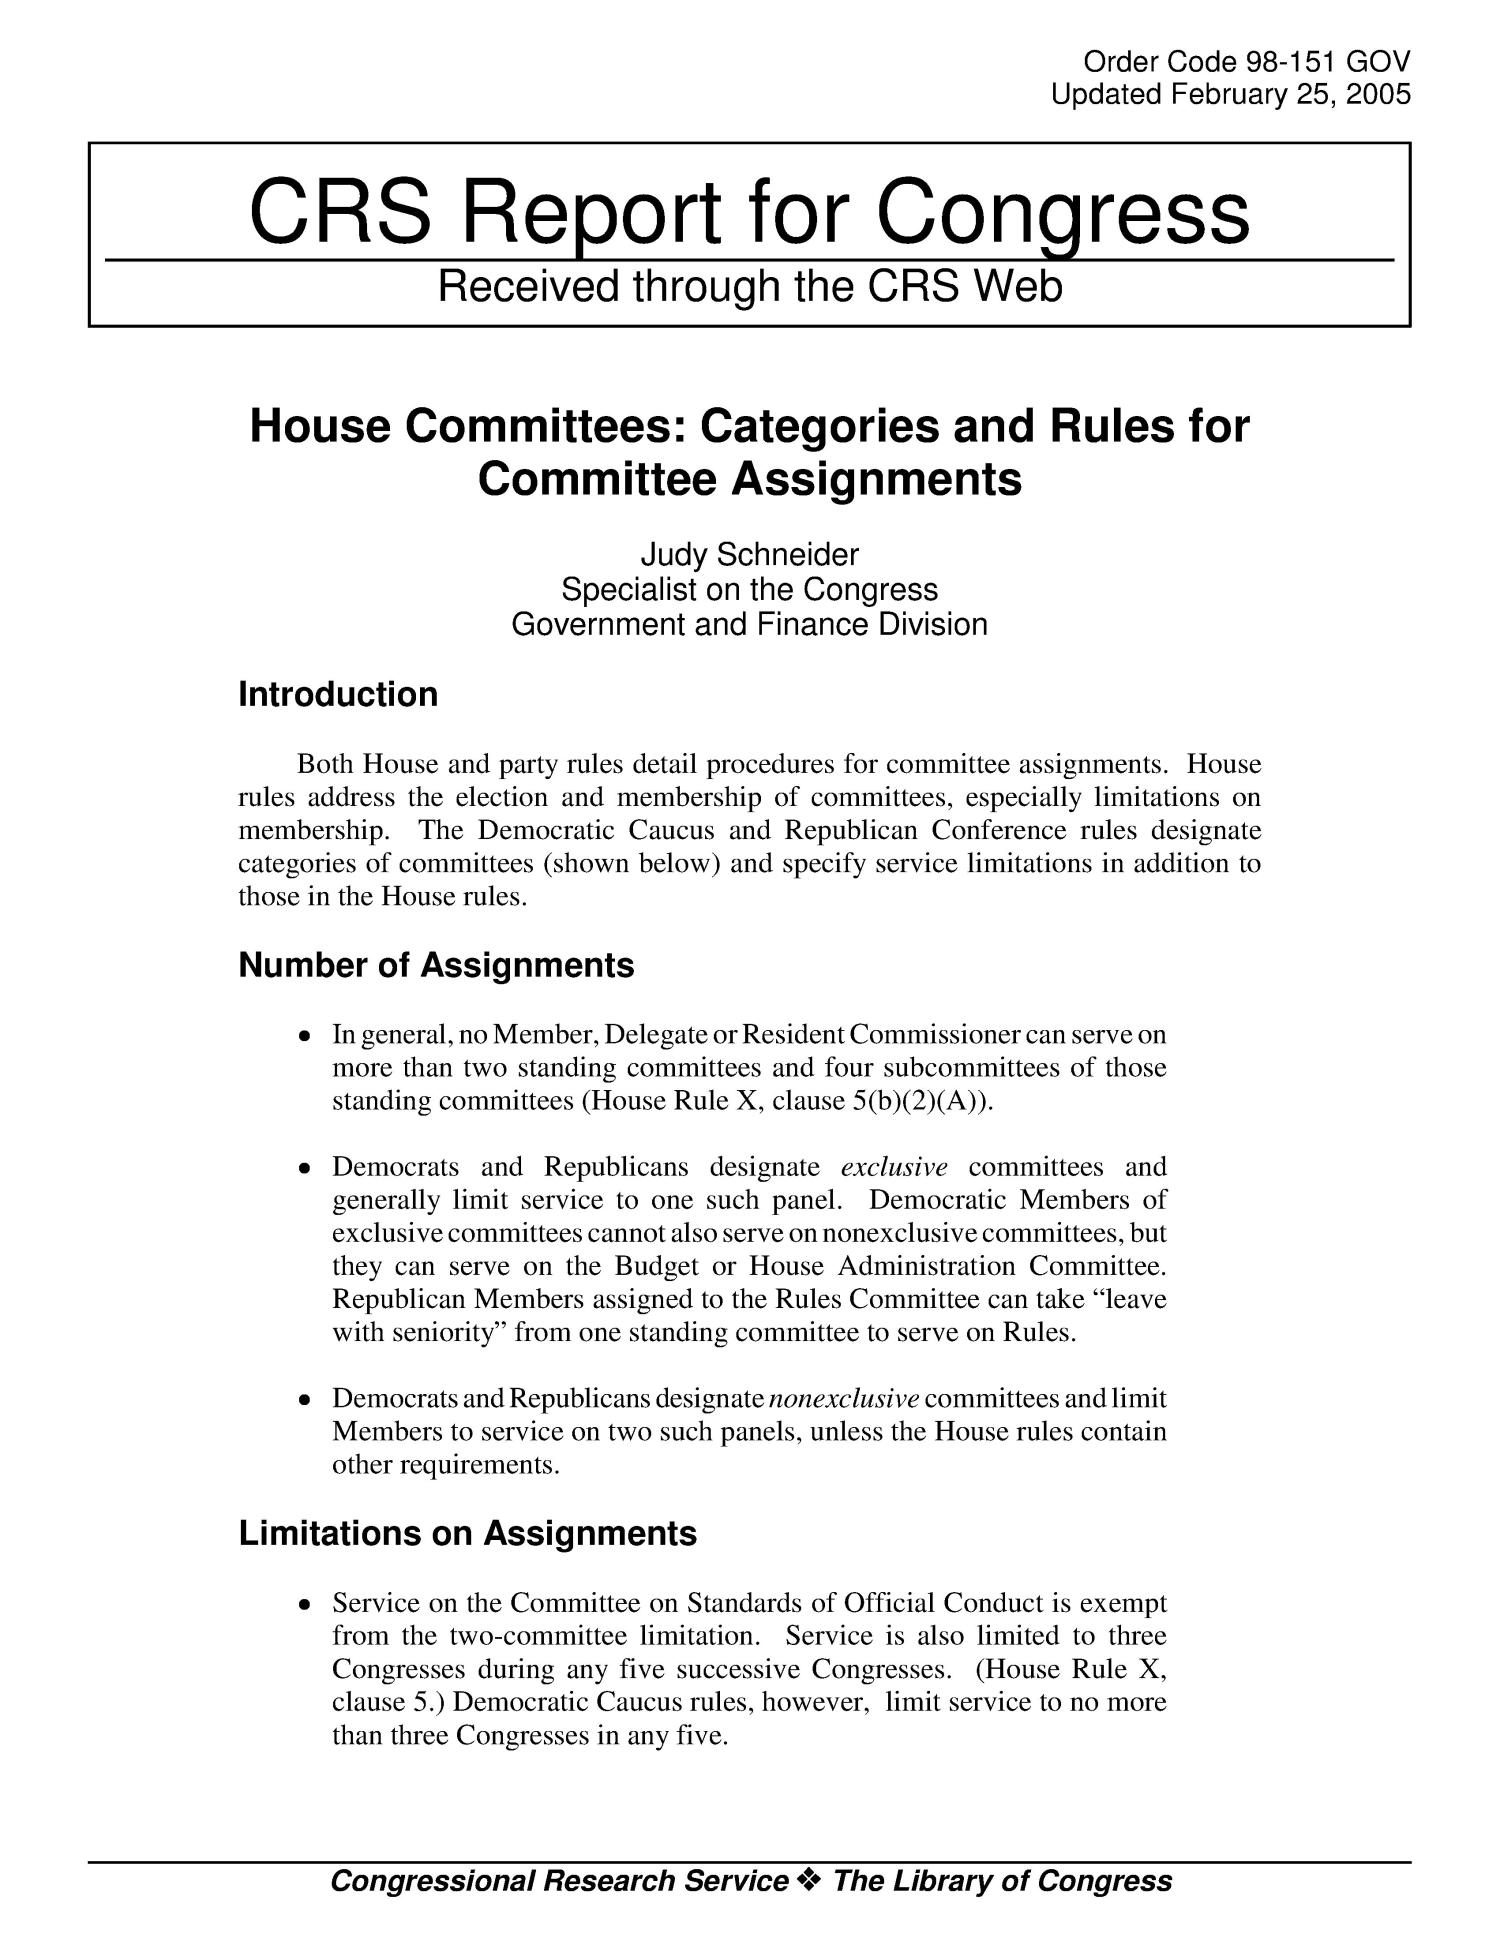 list of house committee assignments